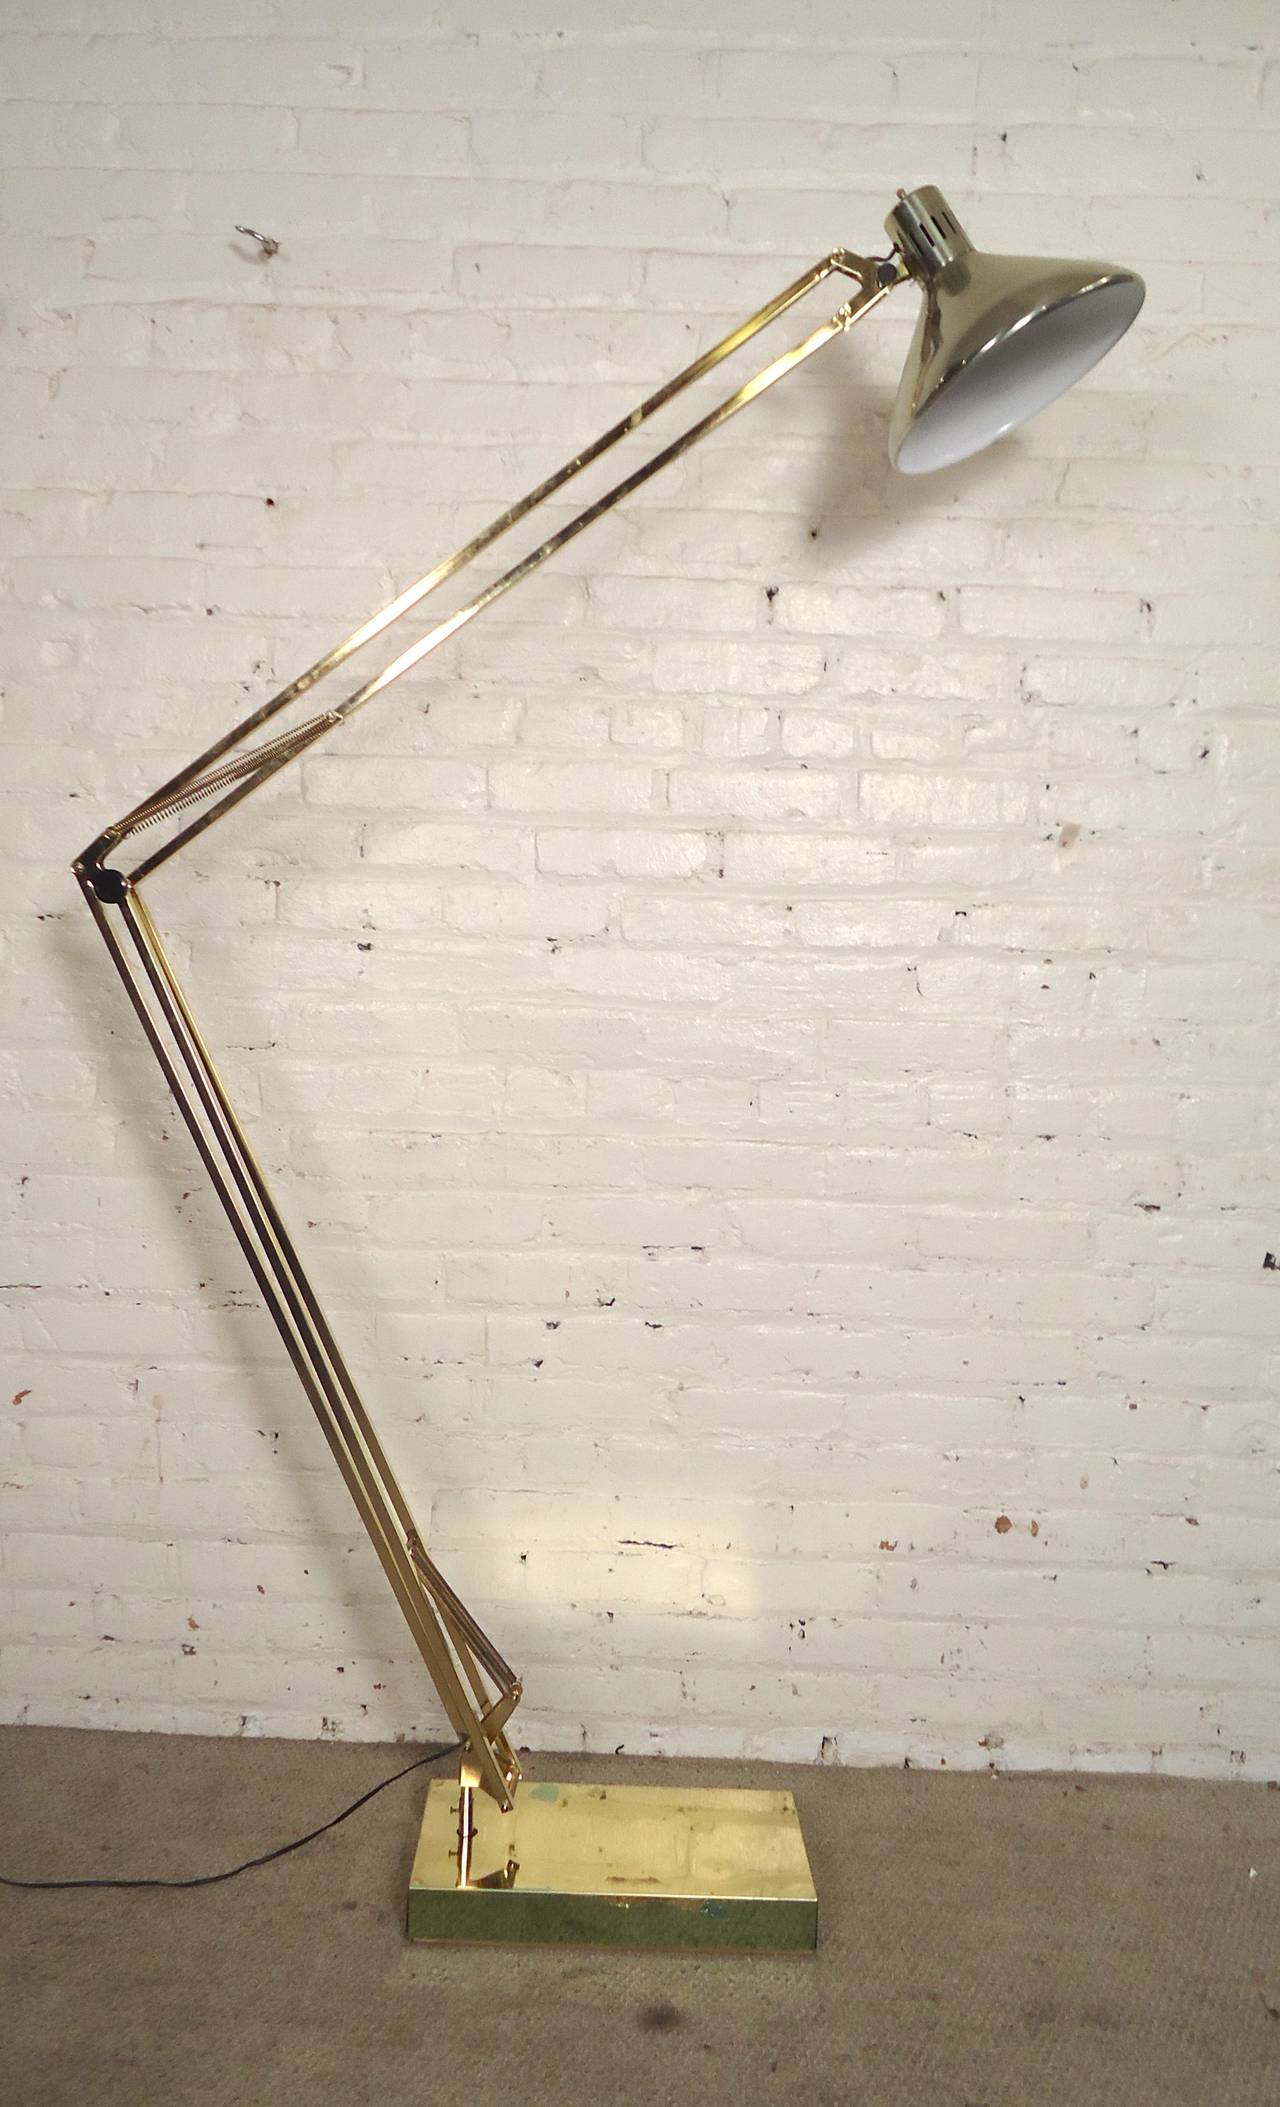 Rare brass floor lamp adjusts from three feet lowered to over six feet high extended. In the manner of the over-sized desk lamps made popular by Gaetano Pesce. Takes one medium size bulb and can turn all the way around to shine in any